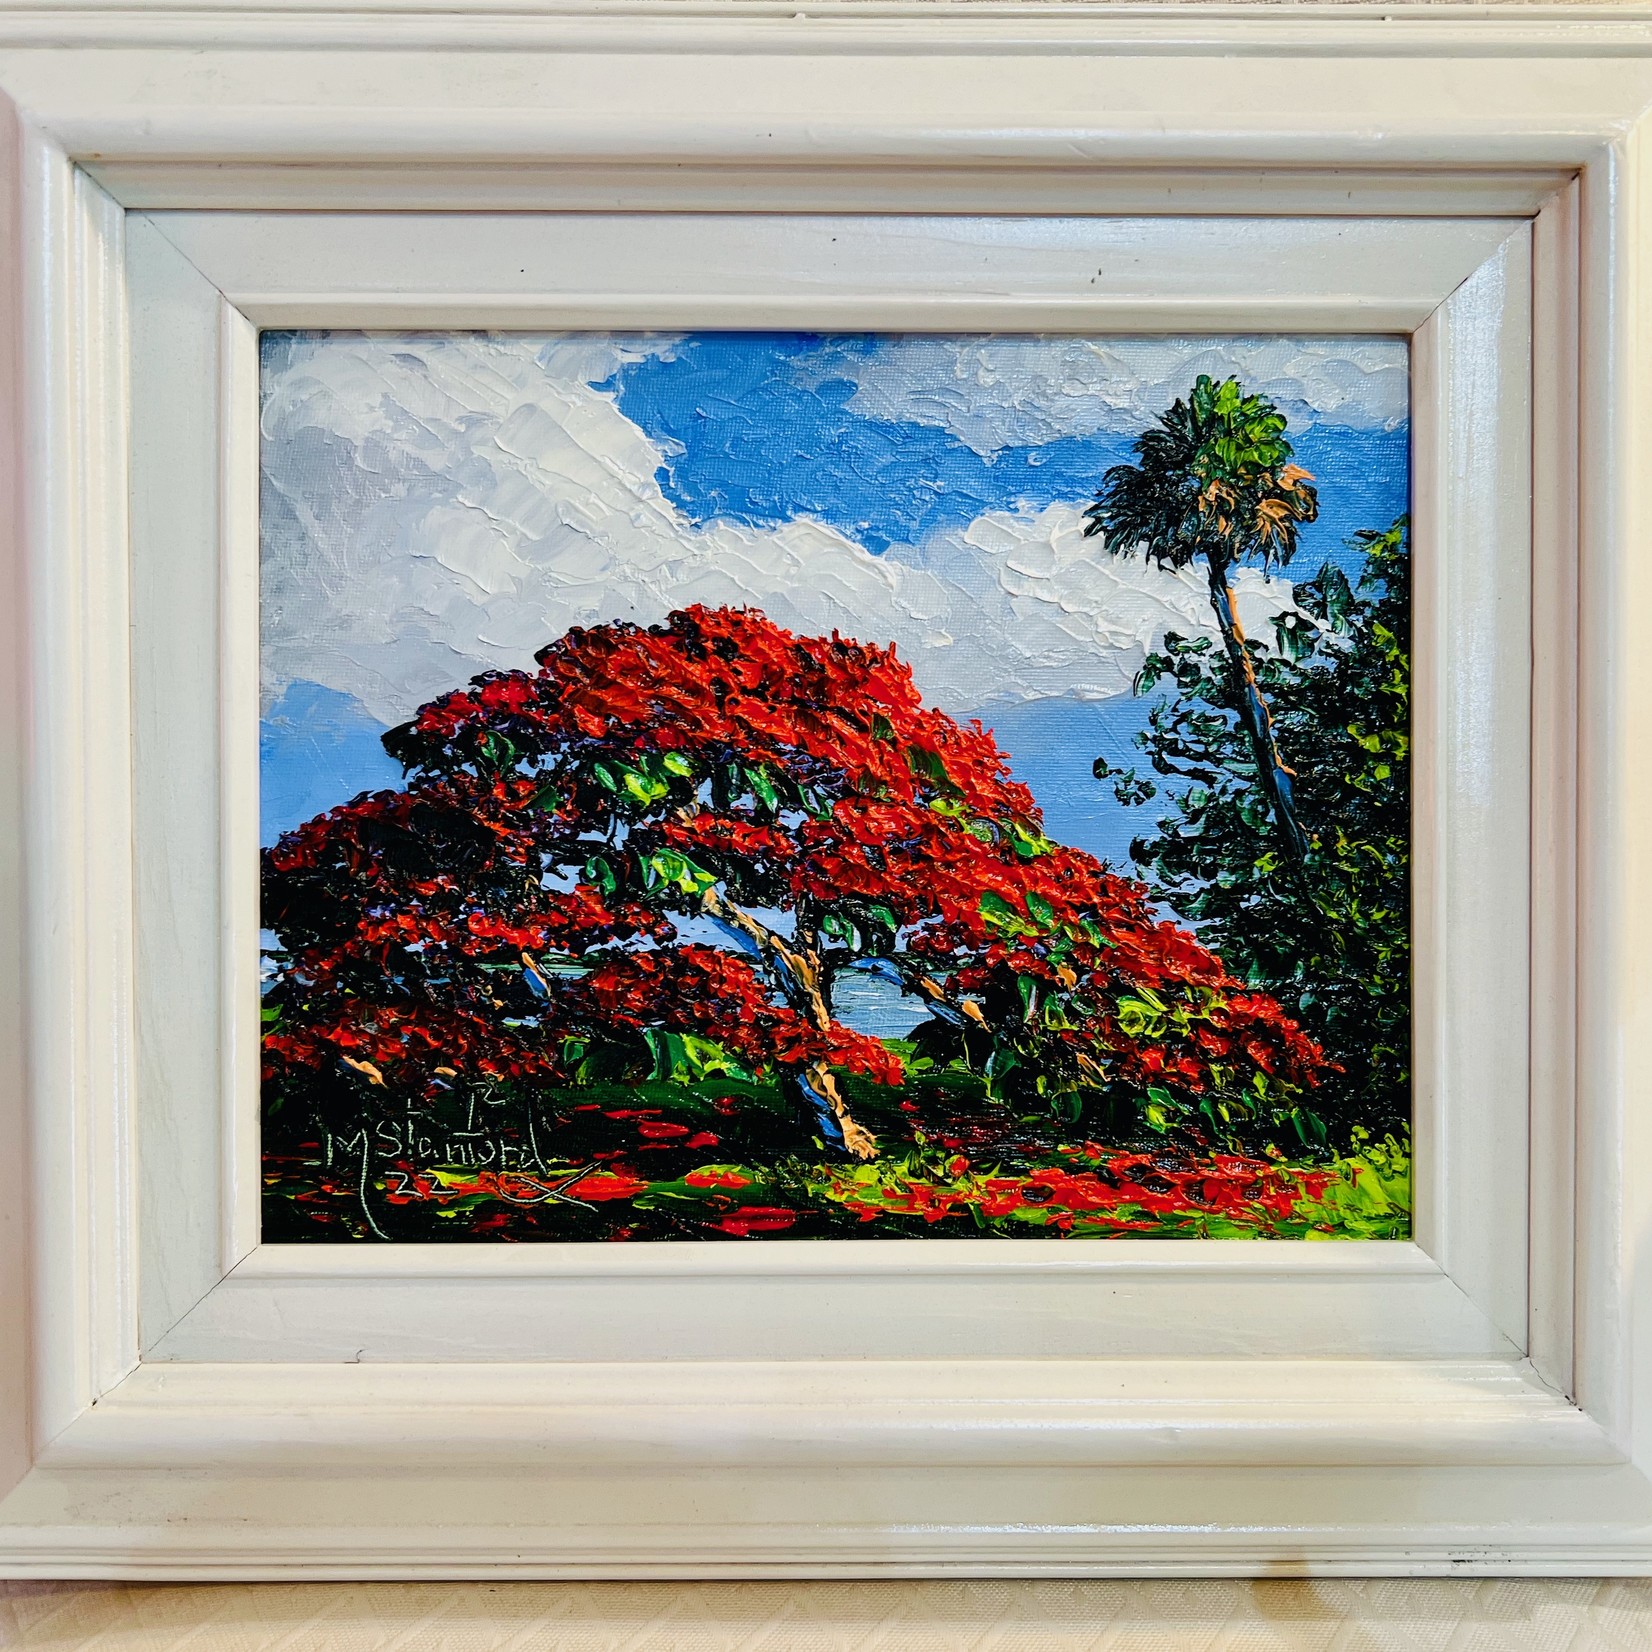 Highwaymen: Original, 2nd Generation, Legacy Poinciana by Mark Stanford, oil on canvas framed, 15x13", RARE